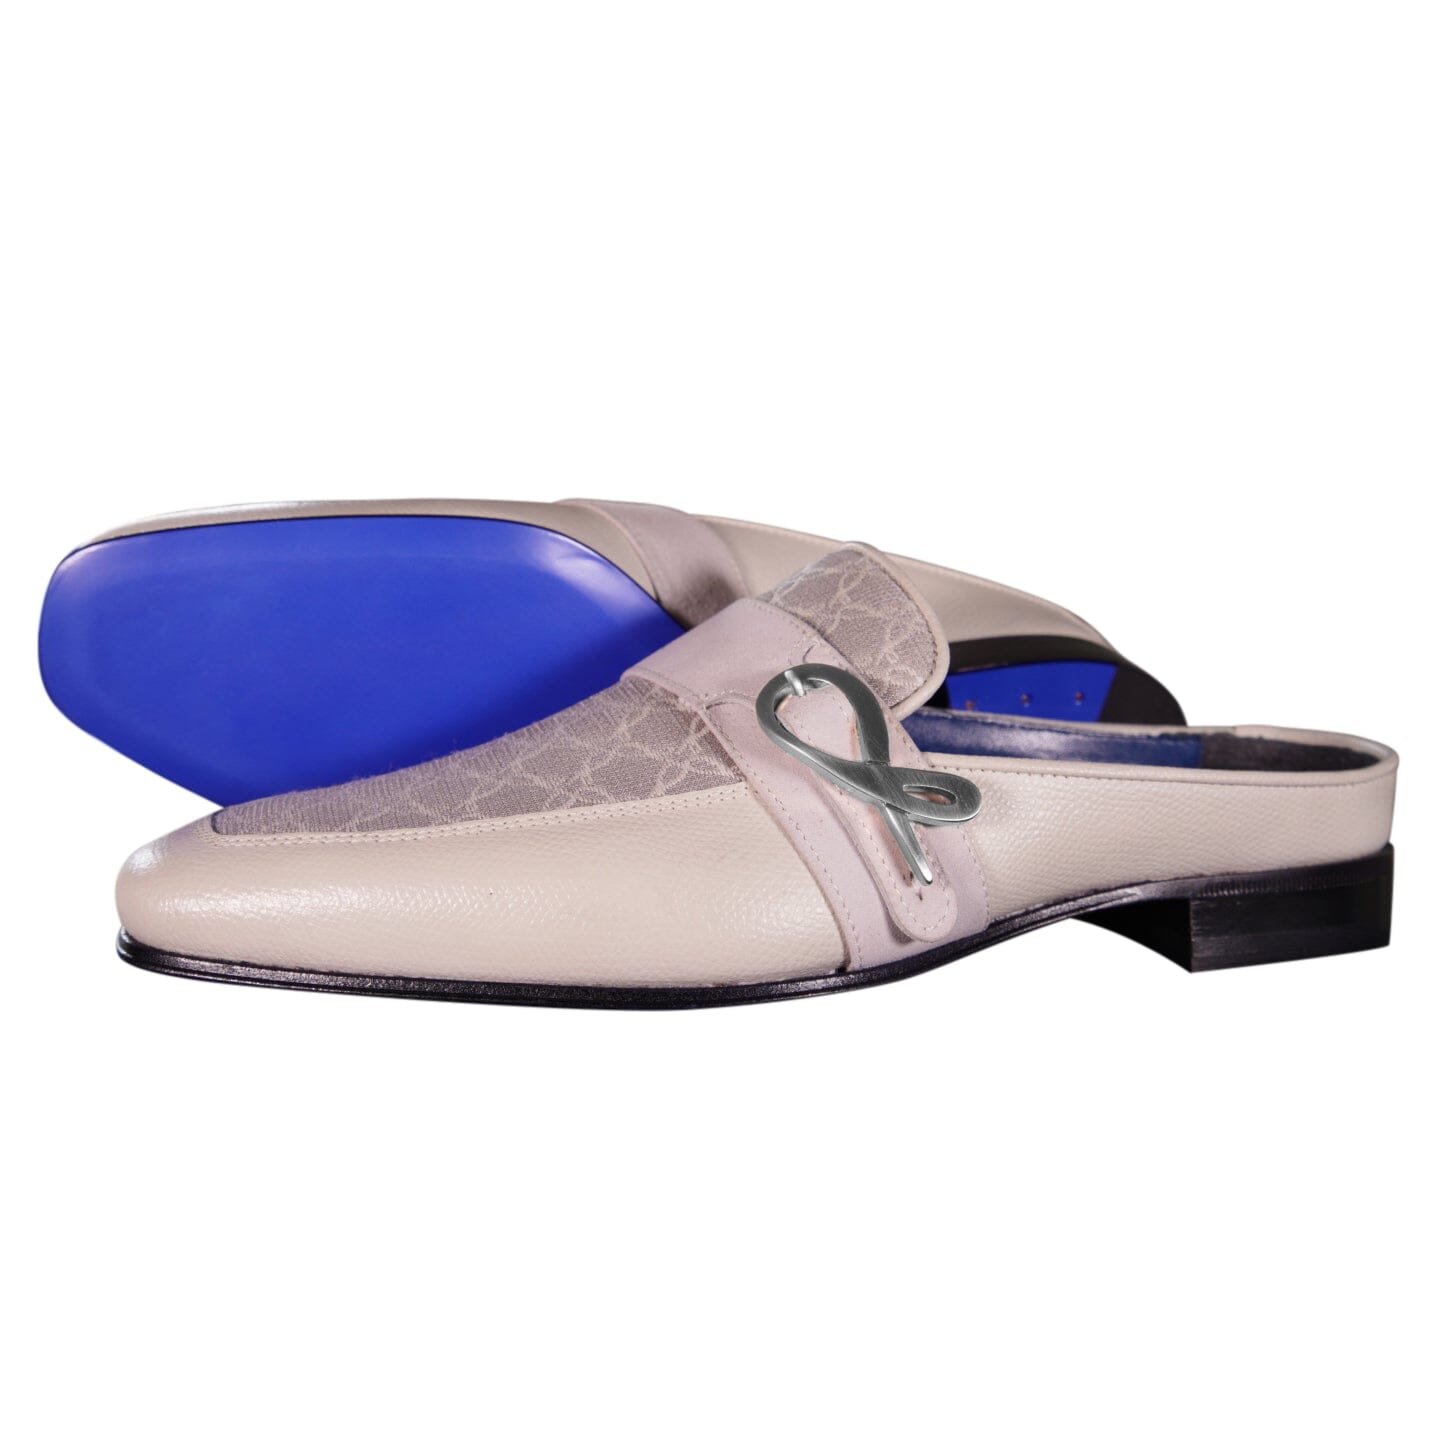 Tortora Logo With Silver Hardware Leather Slippers